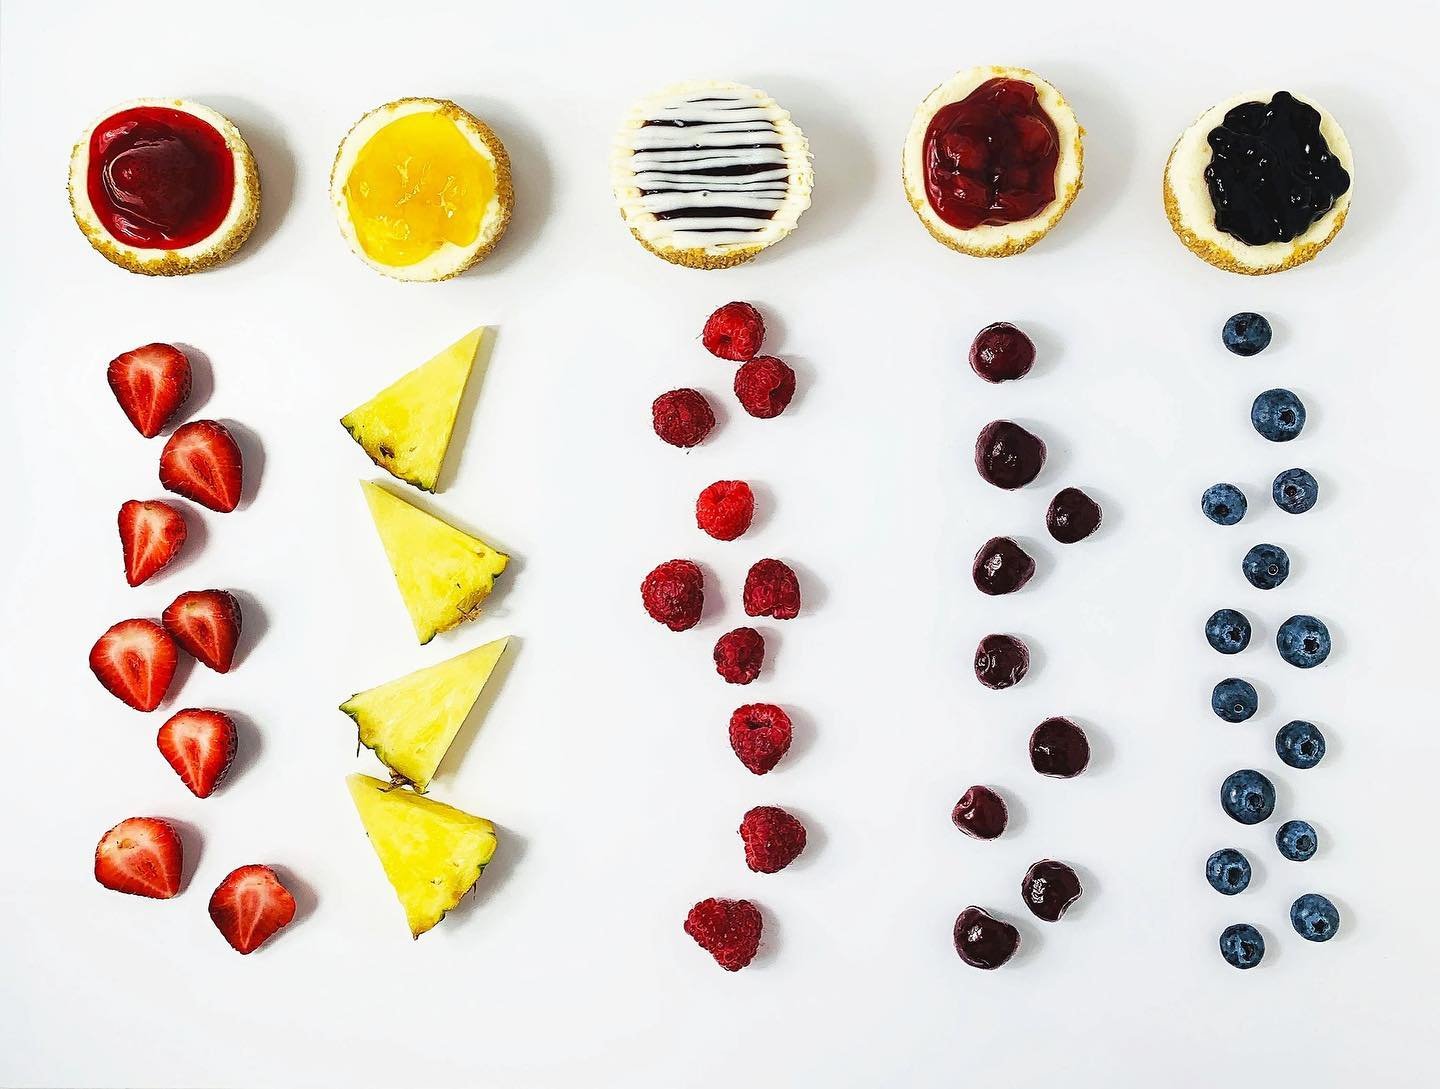 A captivating array of delicious fruits top our classic cheesecake 💙

https://linktr.ee/eileenscheesecake